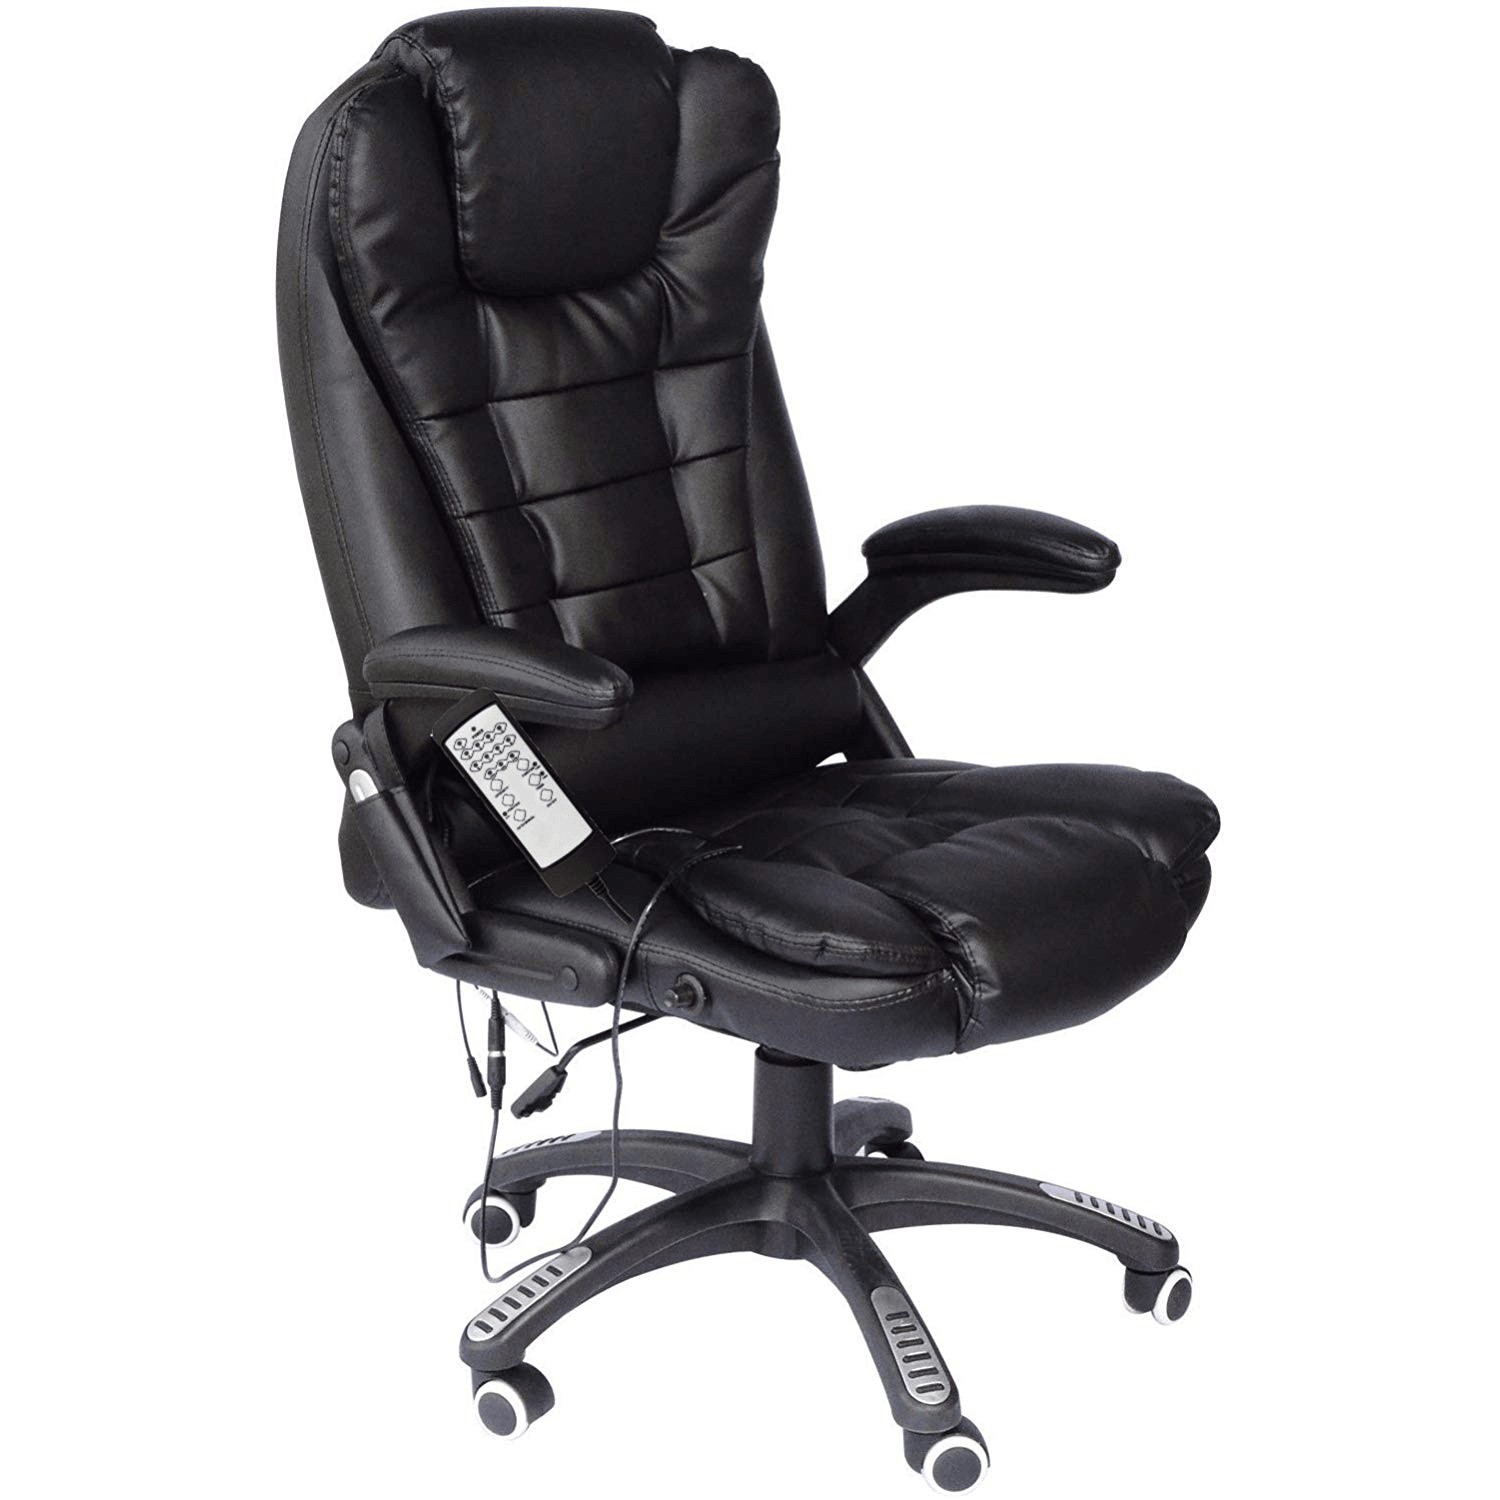 Executive Recline Padded Swivel Office Chair with Vibrating Massage Function, MM17 Black